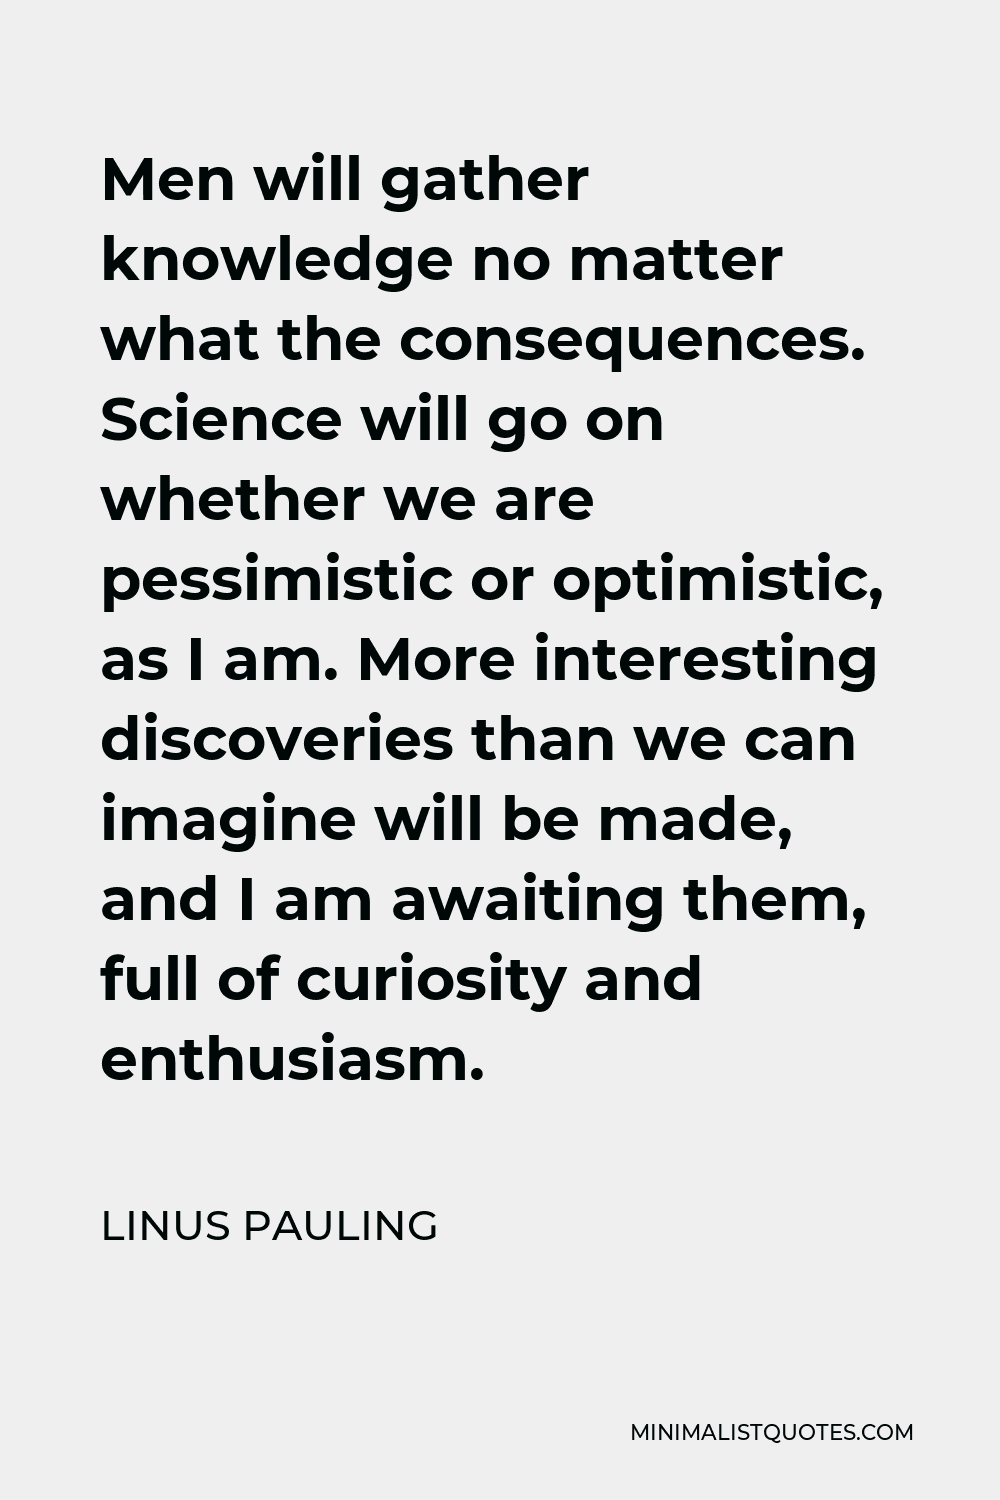 Linus Pauling Quote - Men will gather knowledge no matter what the consequences. Science will go on whether we are pessimistic or optimistic, as I am. More interesting discoveries than we can imagine will be made, and I am awaiting them, full of curiosity and enthusiasm.